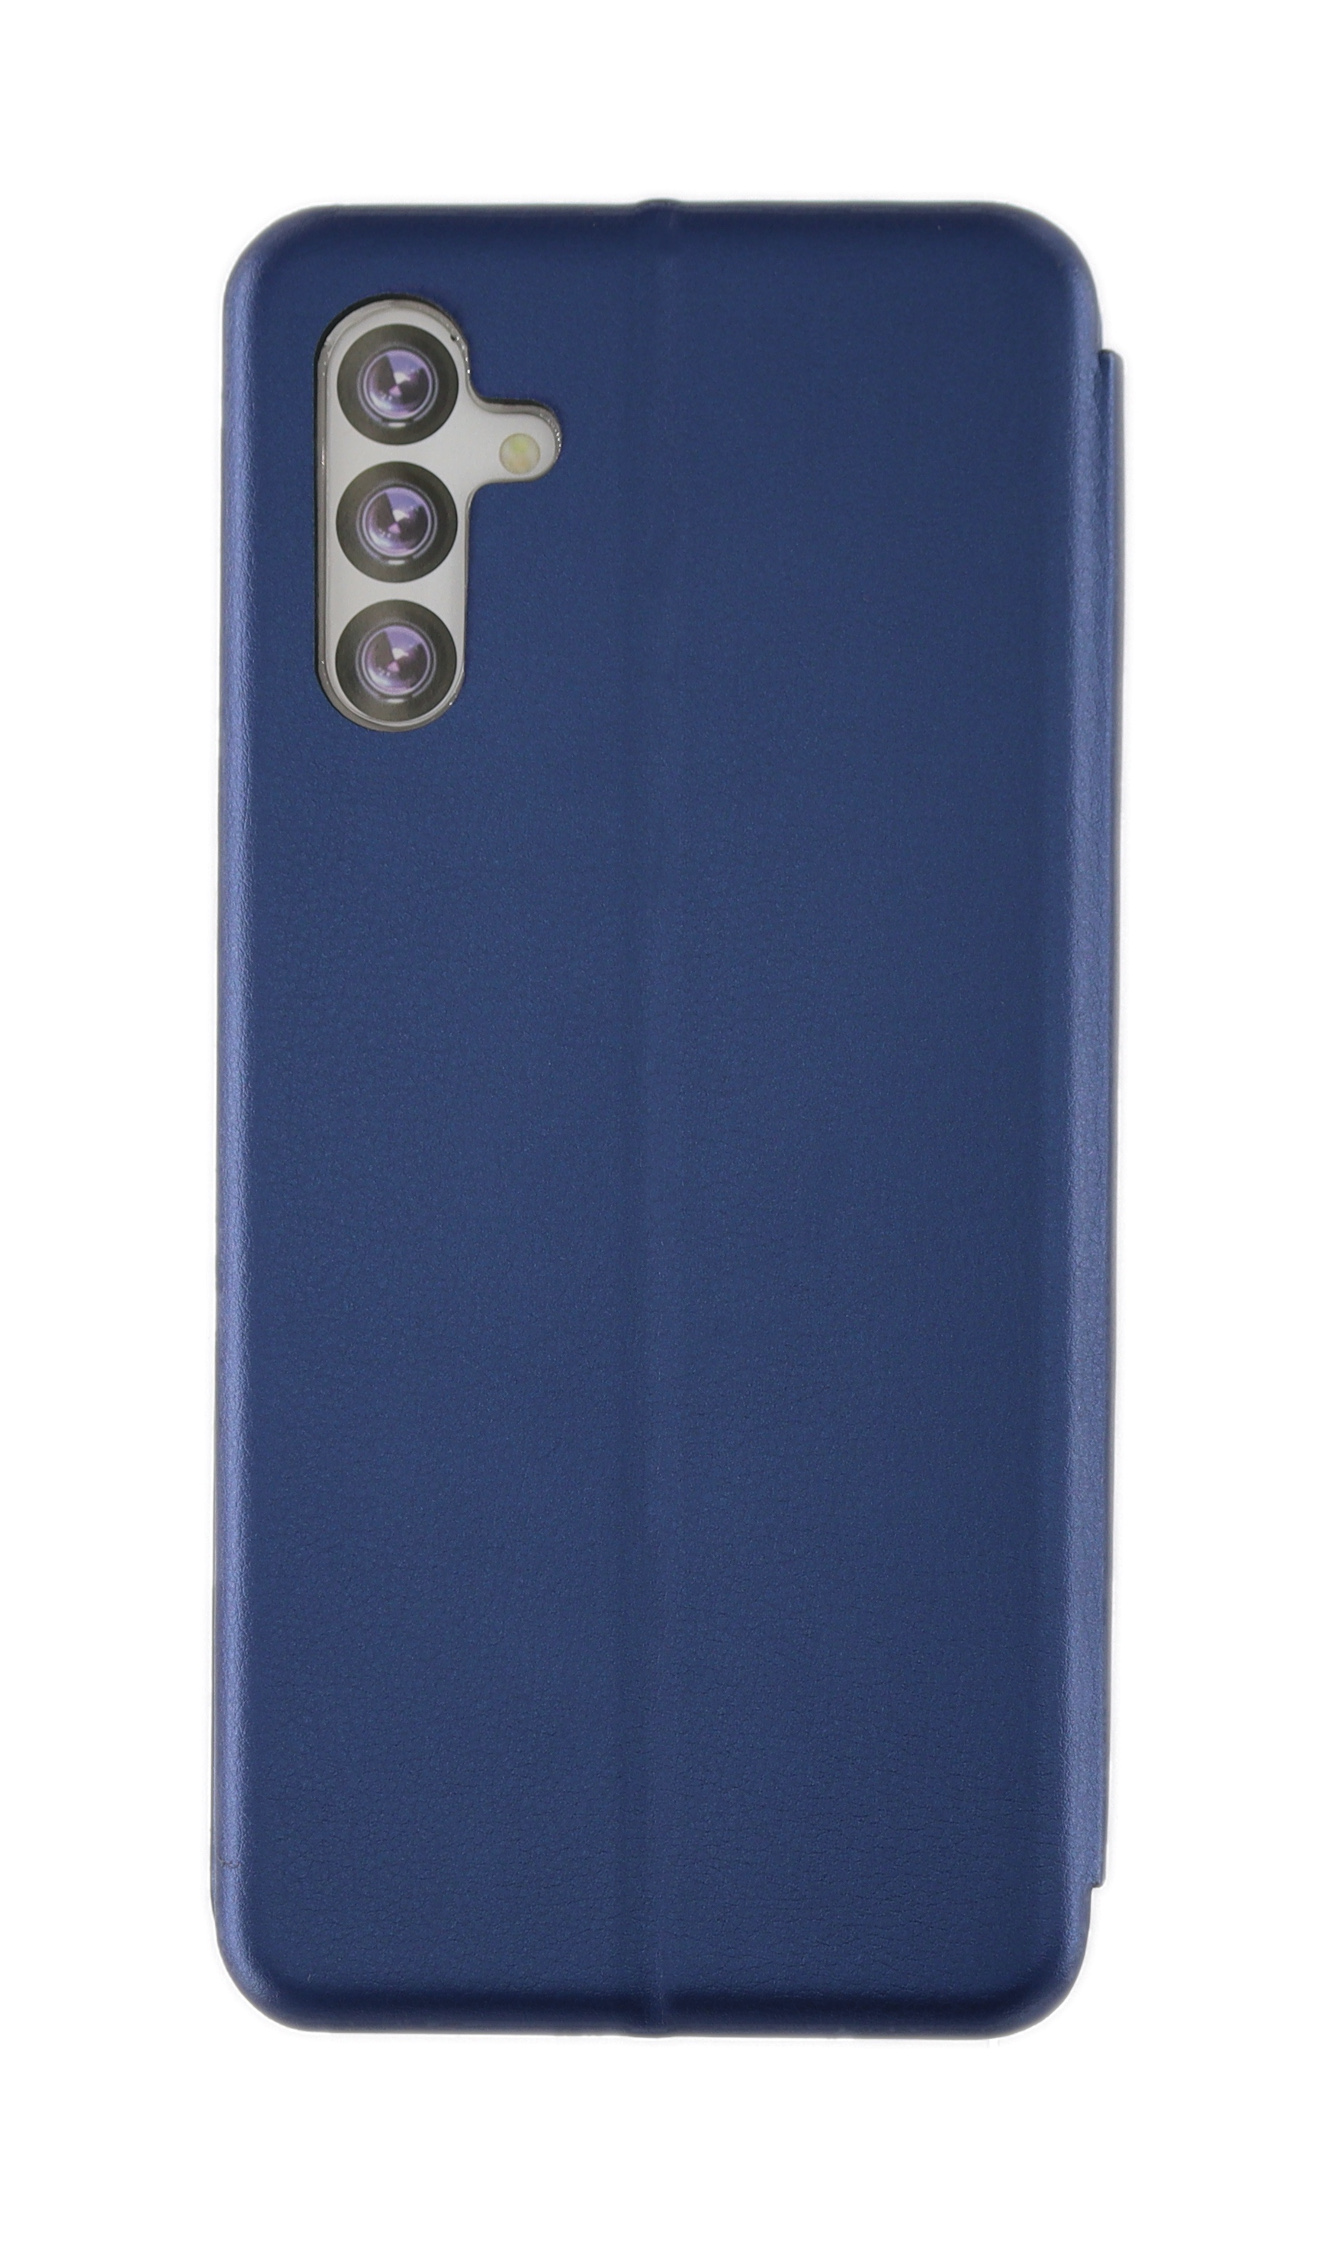 JAMCOVER Bookcase A04s, Galaxy 5G, A13 Rounded, Galaxy Samsung, Marineblau Bookcover